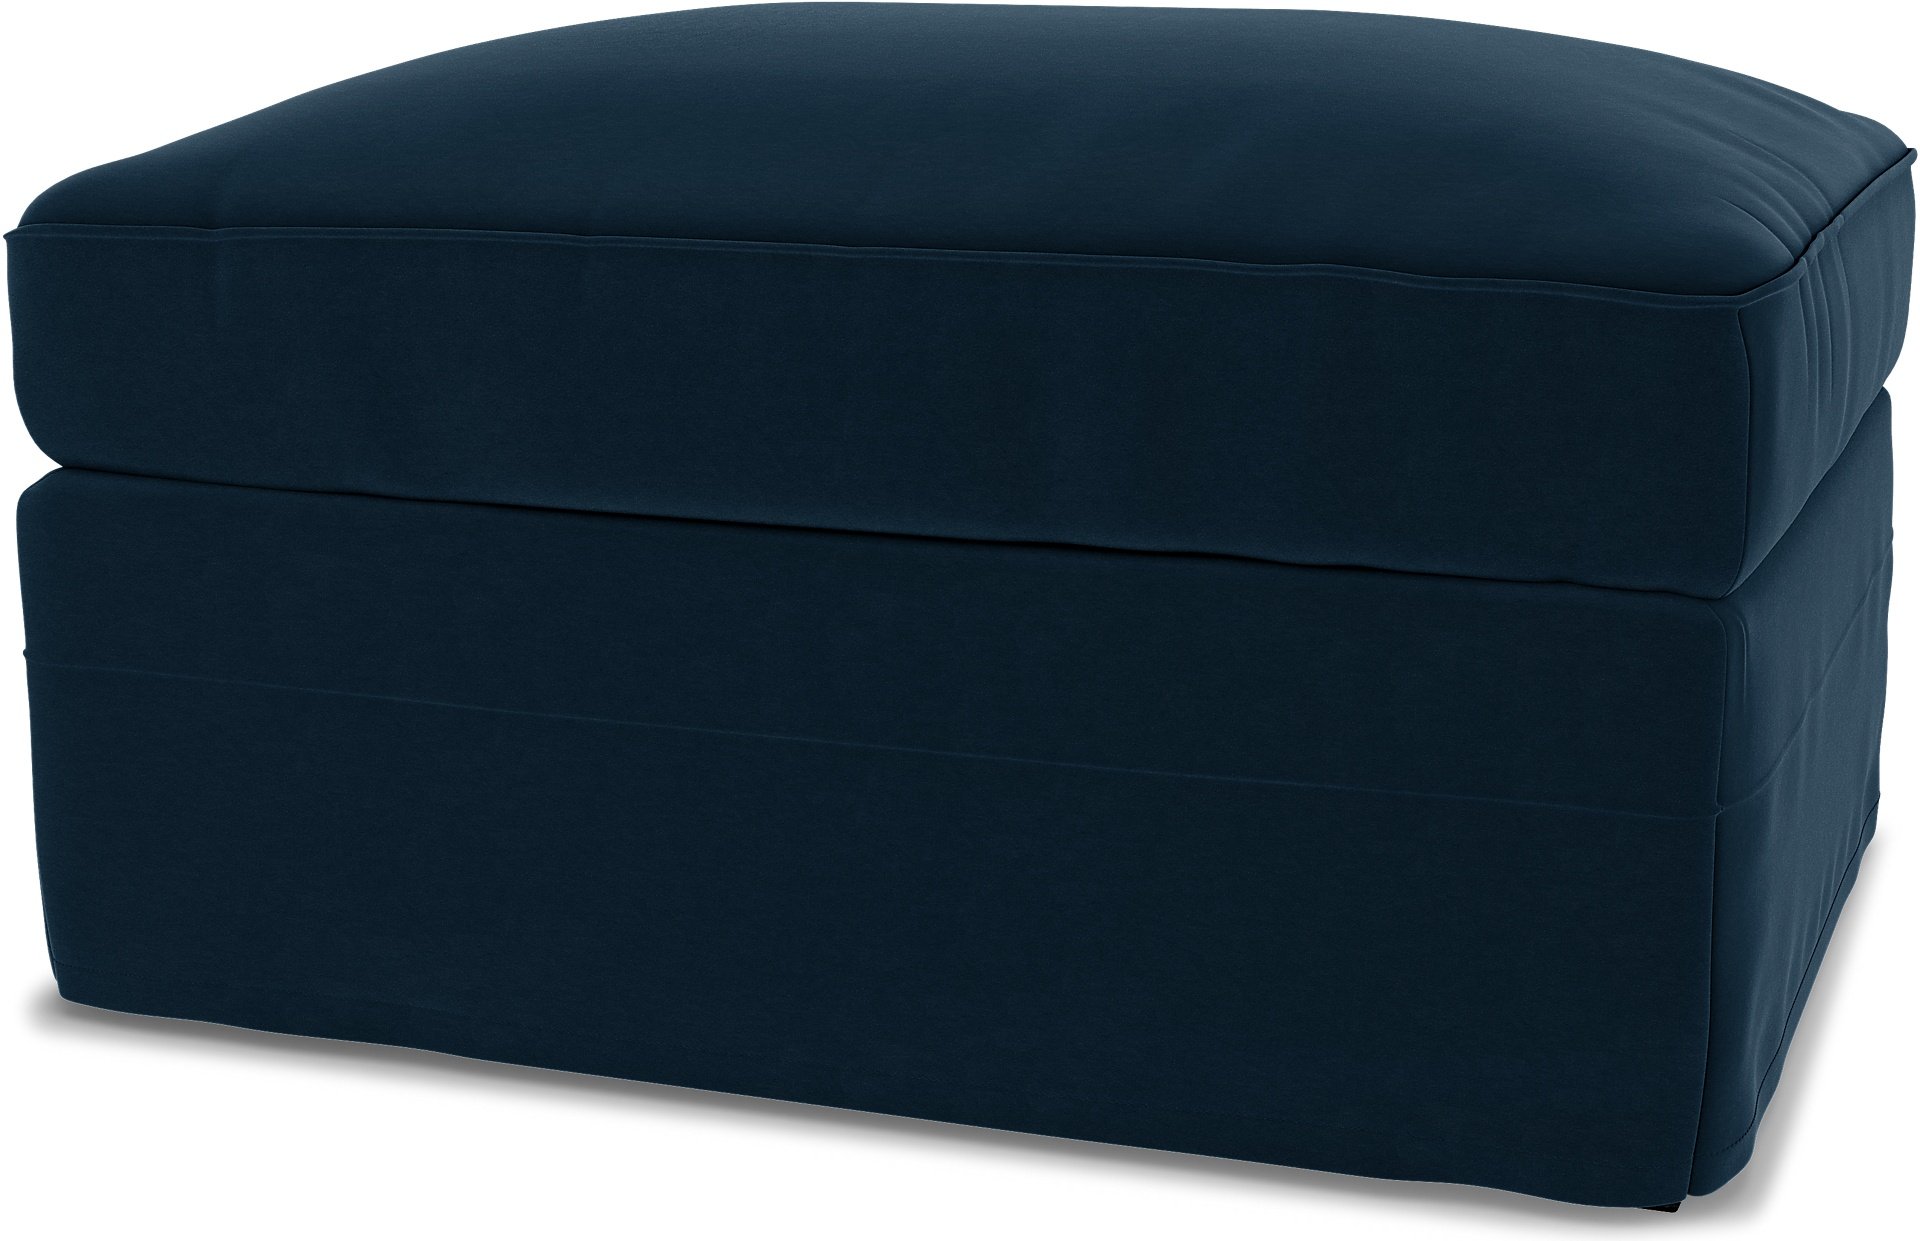 IKEA - Gronlid Footstool with Storage Cover, Midnight, Velvet - Bemz